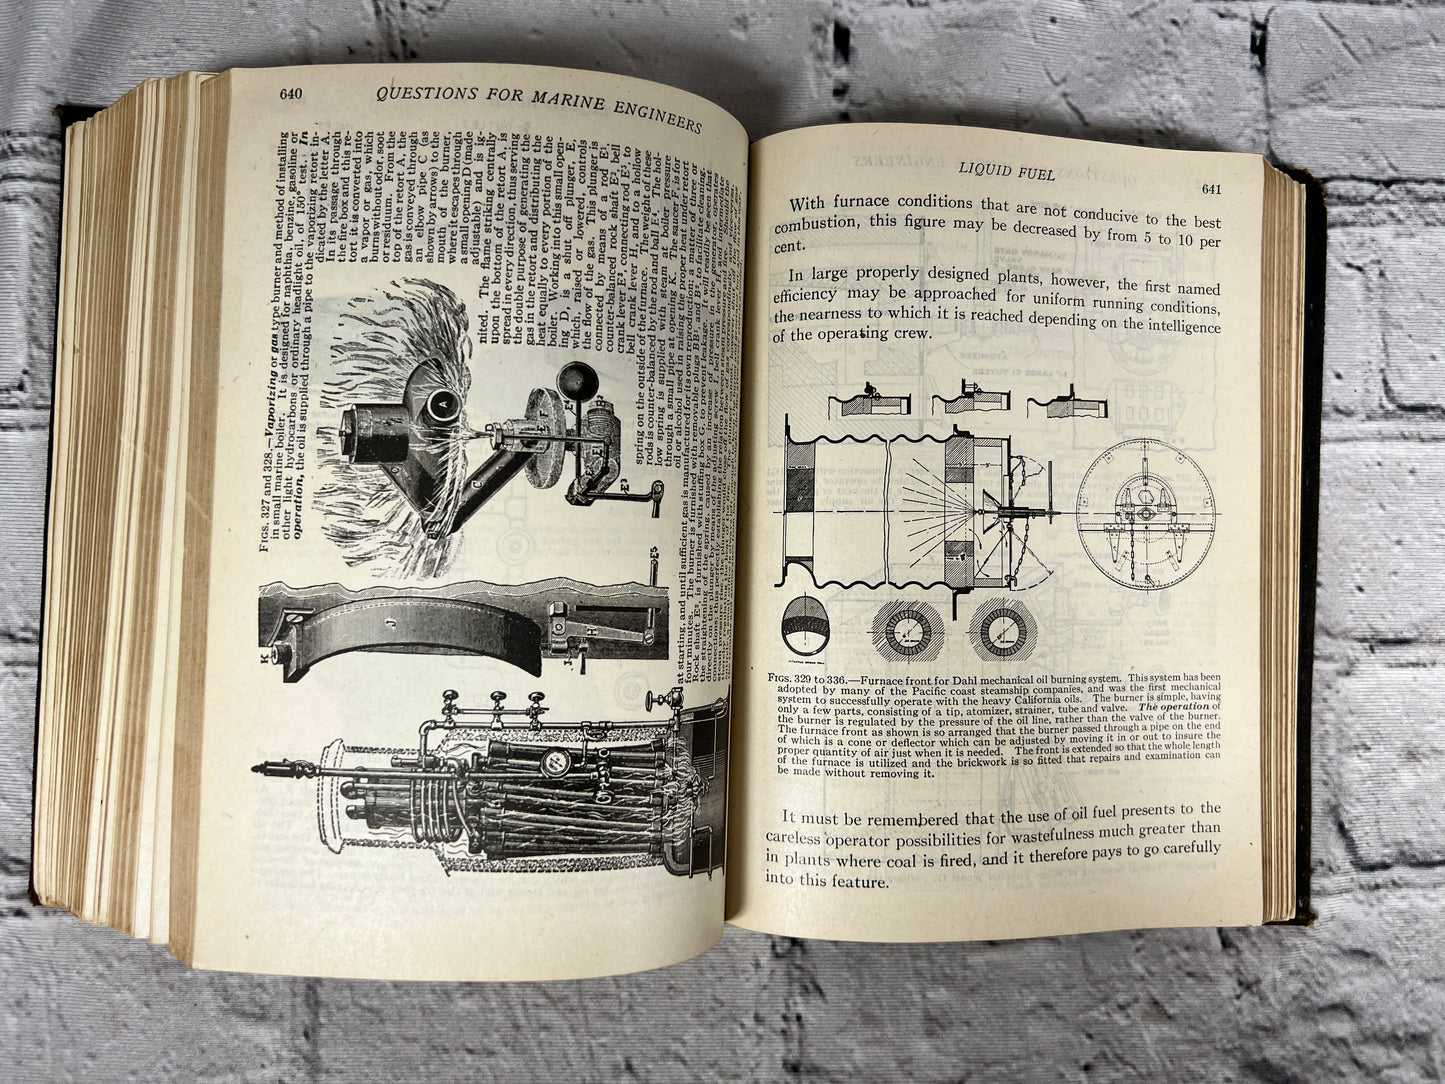 Audels New Marine Engineers Guide With Questions & Answers [1918 · 1st Edition]